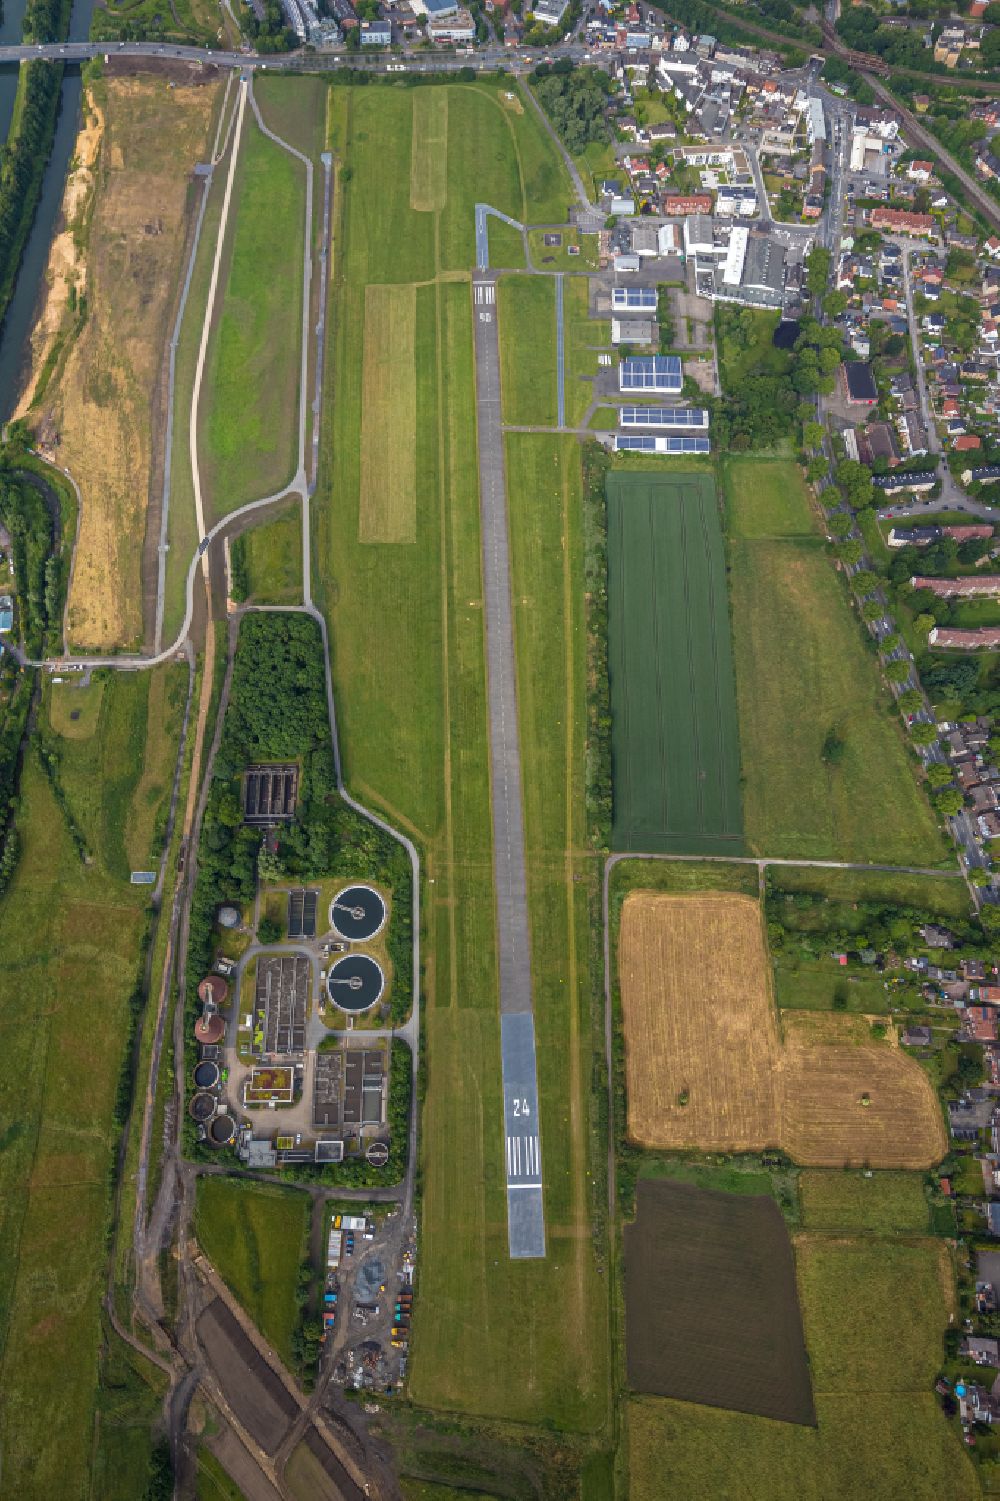 Hamm (Westfalen) from above - Runway and taxiway area of the Hamm-Lippewiesen EDLH airfield and floodplain landscape of the Erlebnisraum Lippe on the Lippe River in the Heessen district of Hamm in the German state of North Rhine-Westphalia